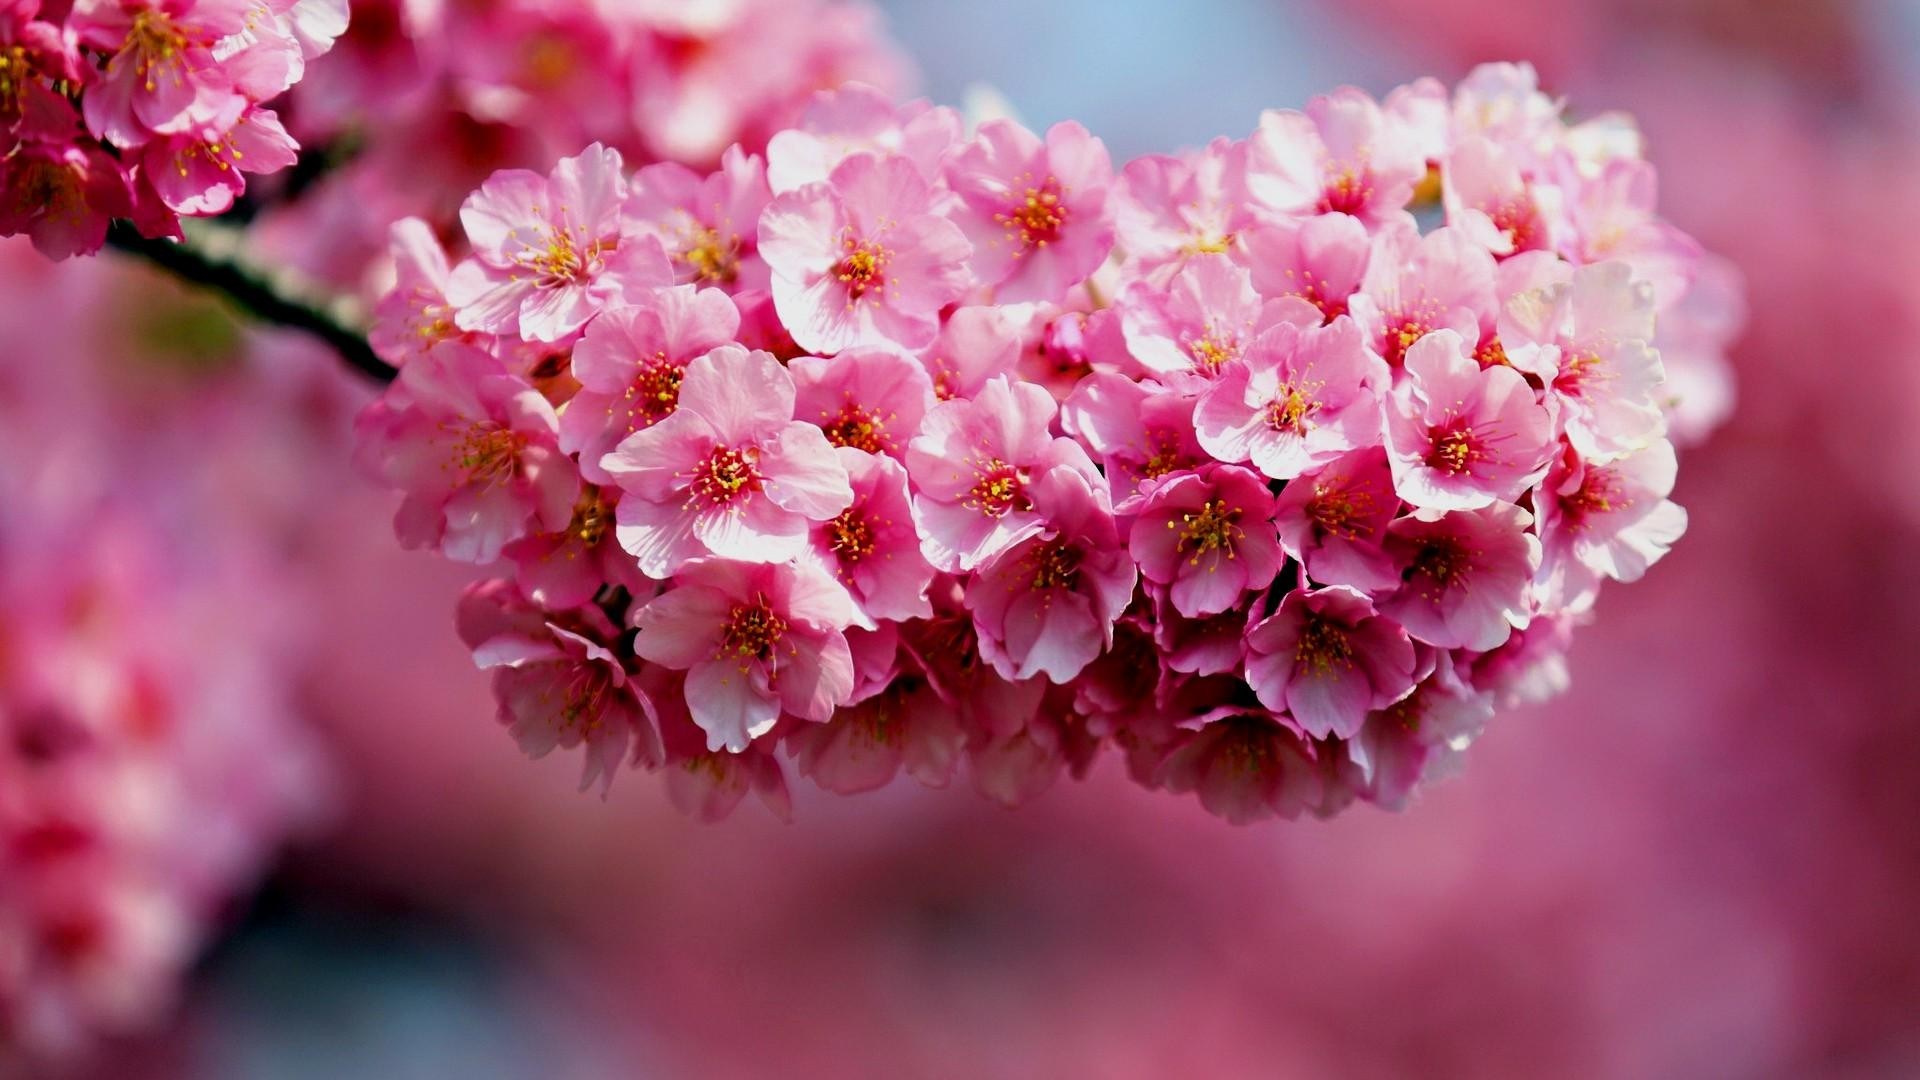 Desktop Background Picture of Flowers with Cherry Blossoms ...